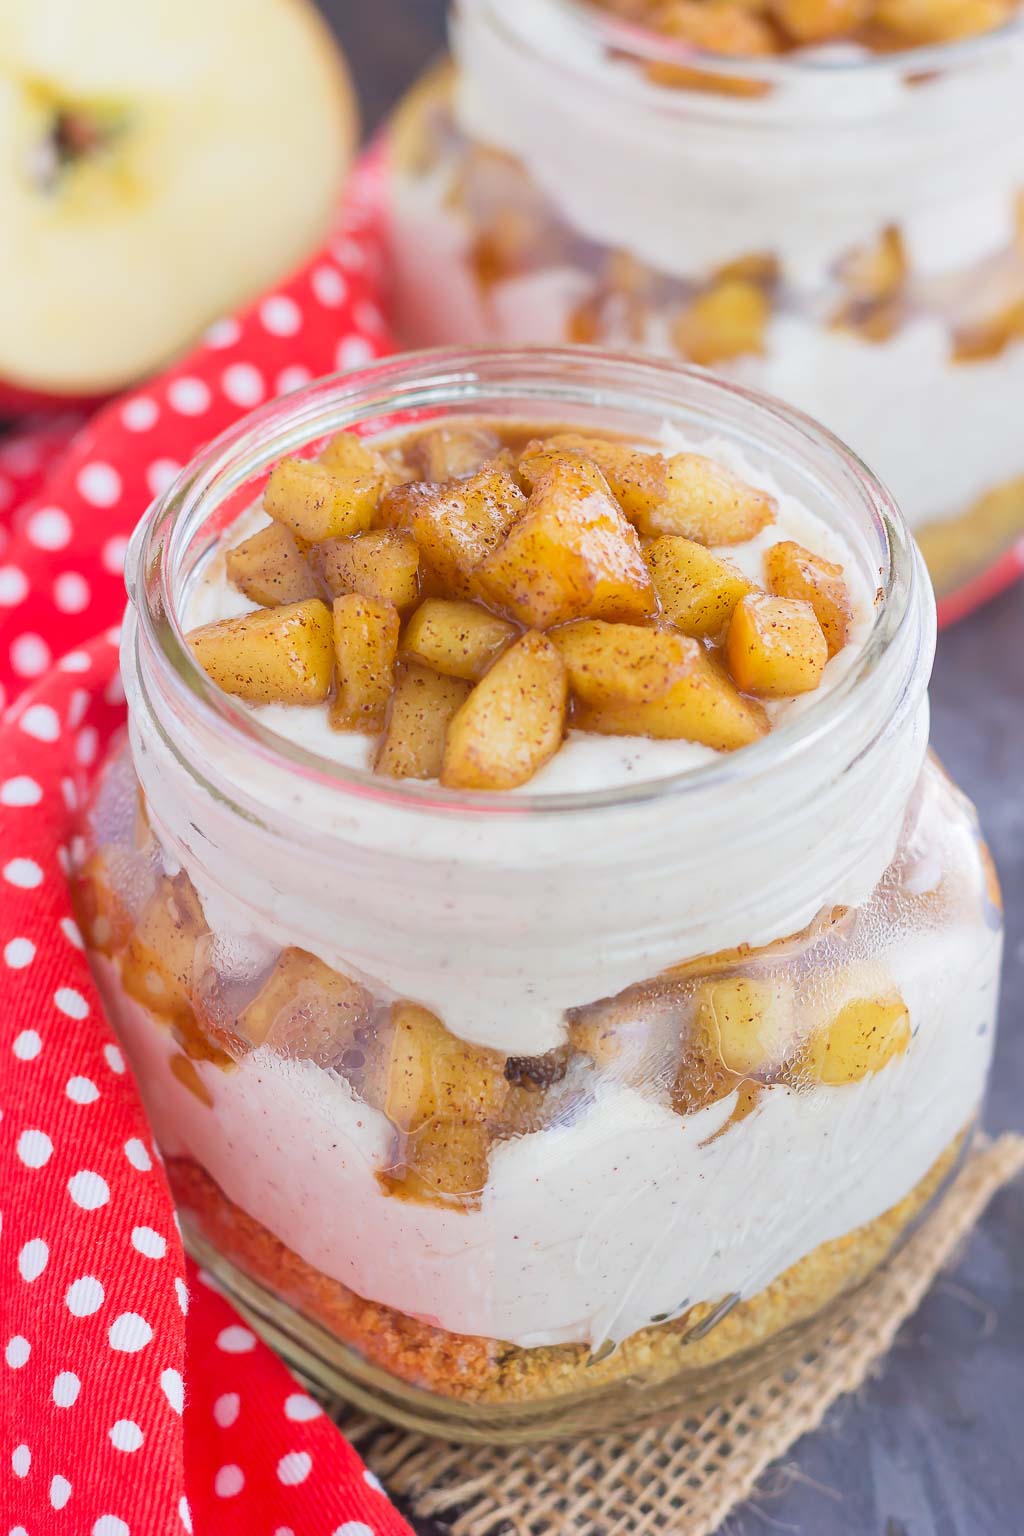 This No-Bake Apple Cinnamon Cheesecake features a creamy, apple spice batter that's layered on top of crushed graham crackers and topped with tender, cinnamon and brown sugar apples. It's an easy treat that's ready in no time and perfect for fall!